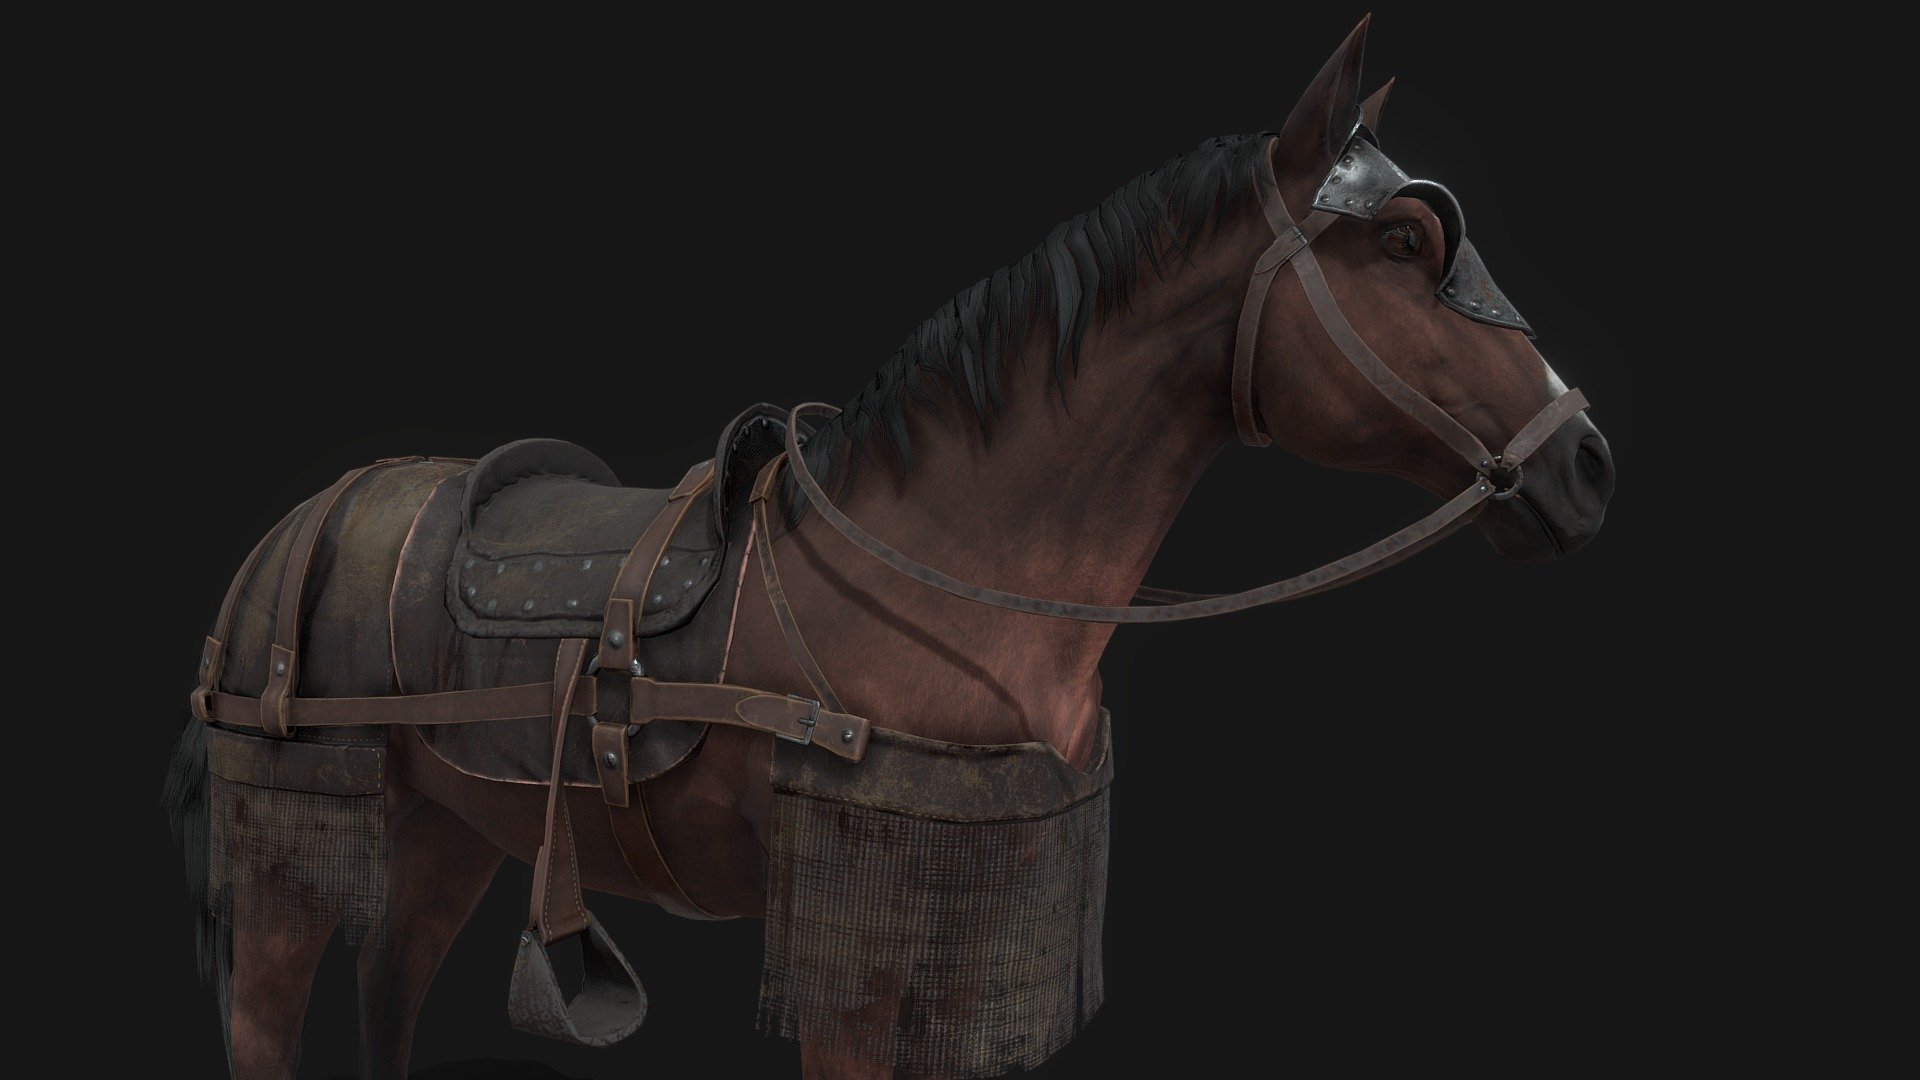 A suit of medieval Horse Armor! 
(Horse Animal is from Malbers Animations)

This is a medieval equipment set for a lowly knight’s warhorse. Textures are PBR including Albedo, Normal, Metallic, AO, and Roughness 4K textures in PNG format.

9801 Triangles 3d model